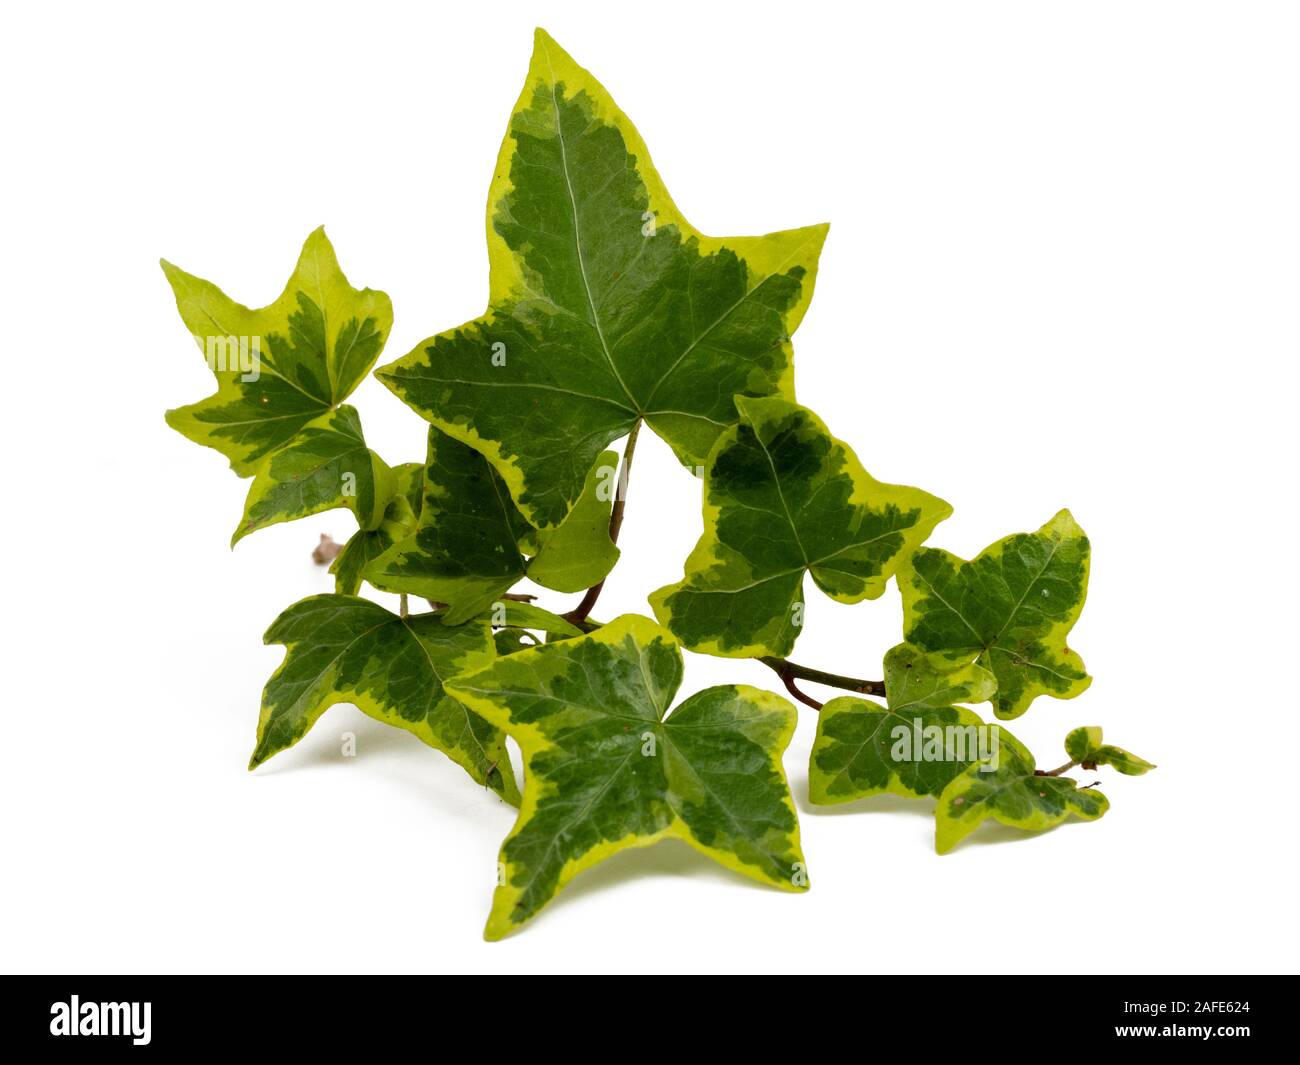 Yellow variegated leaves of the hardy evergreen climbing ivy, Hedera helix 'Goldchild' on a white background Stock Photo